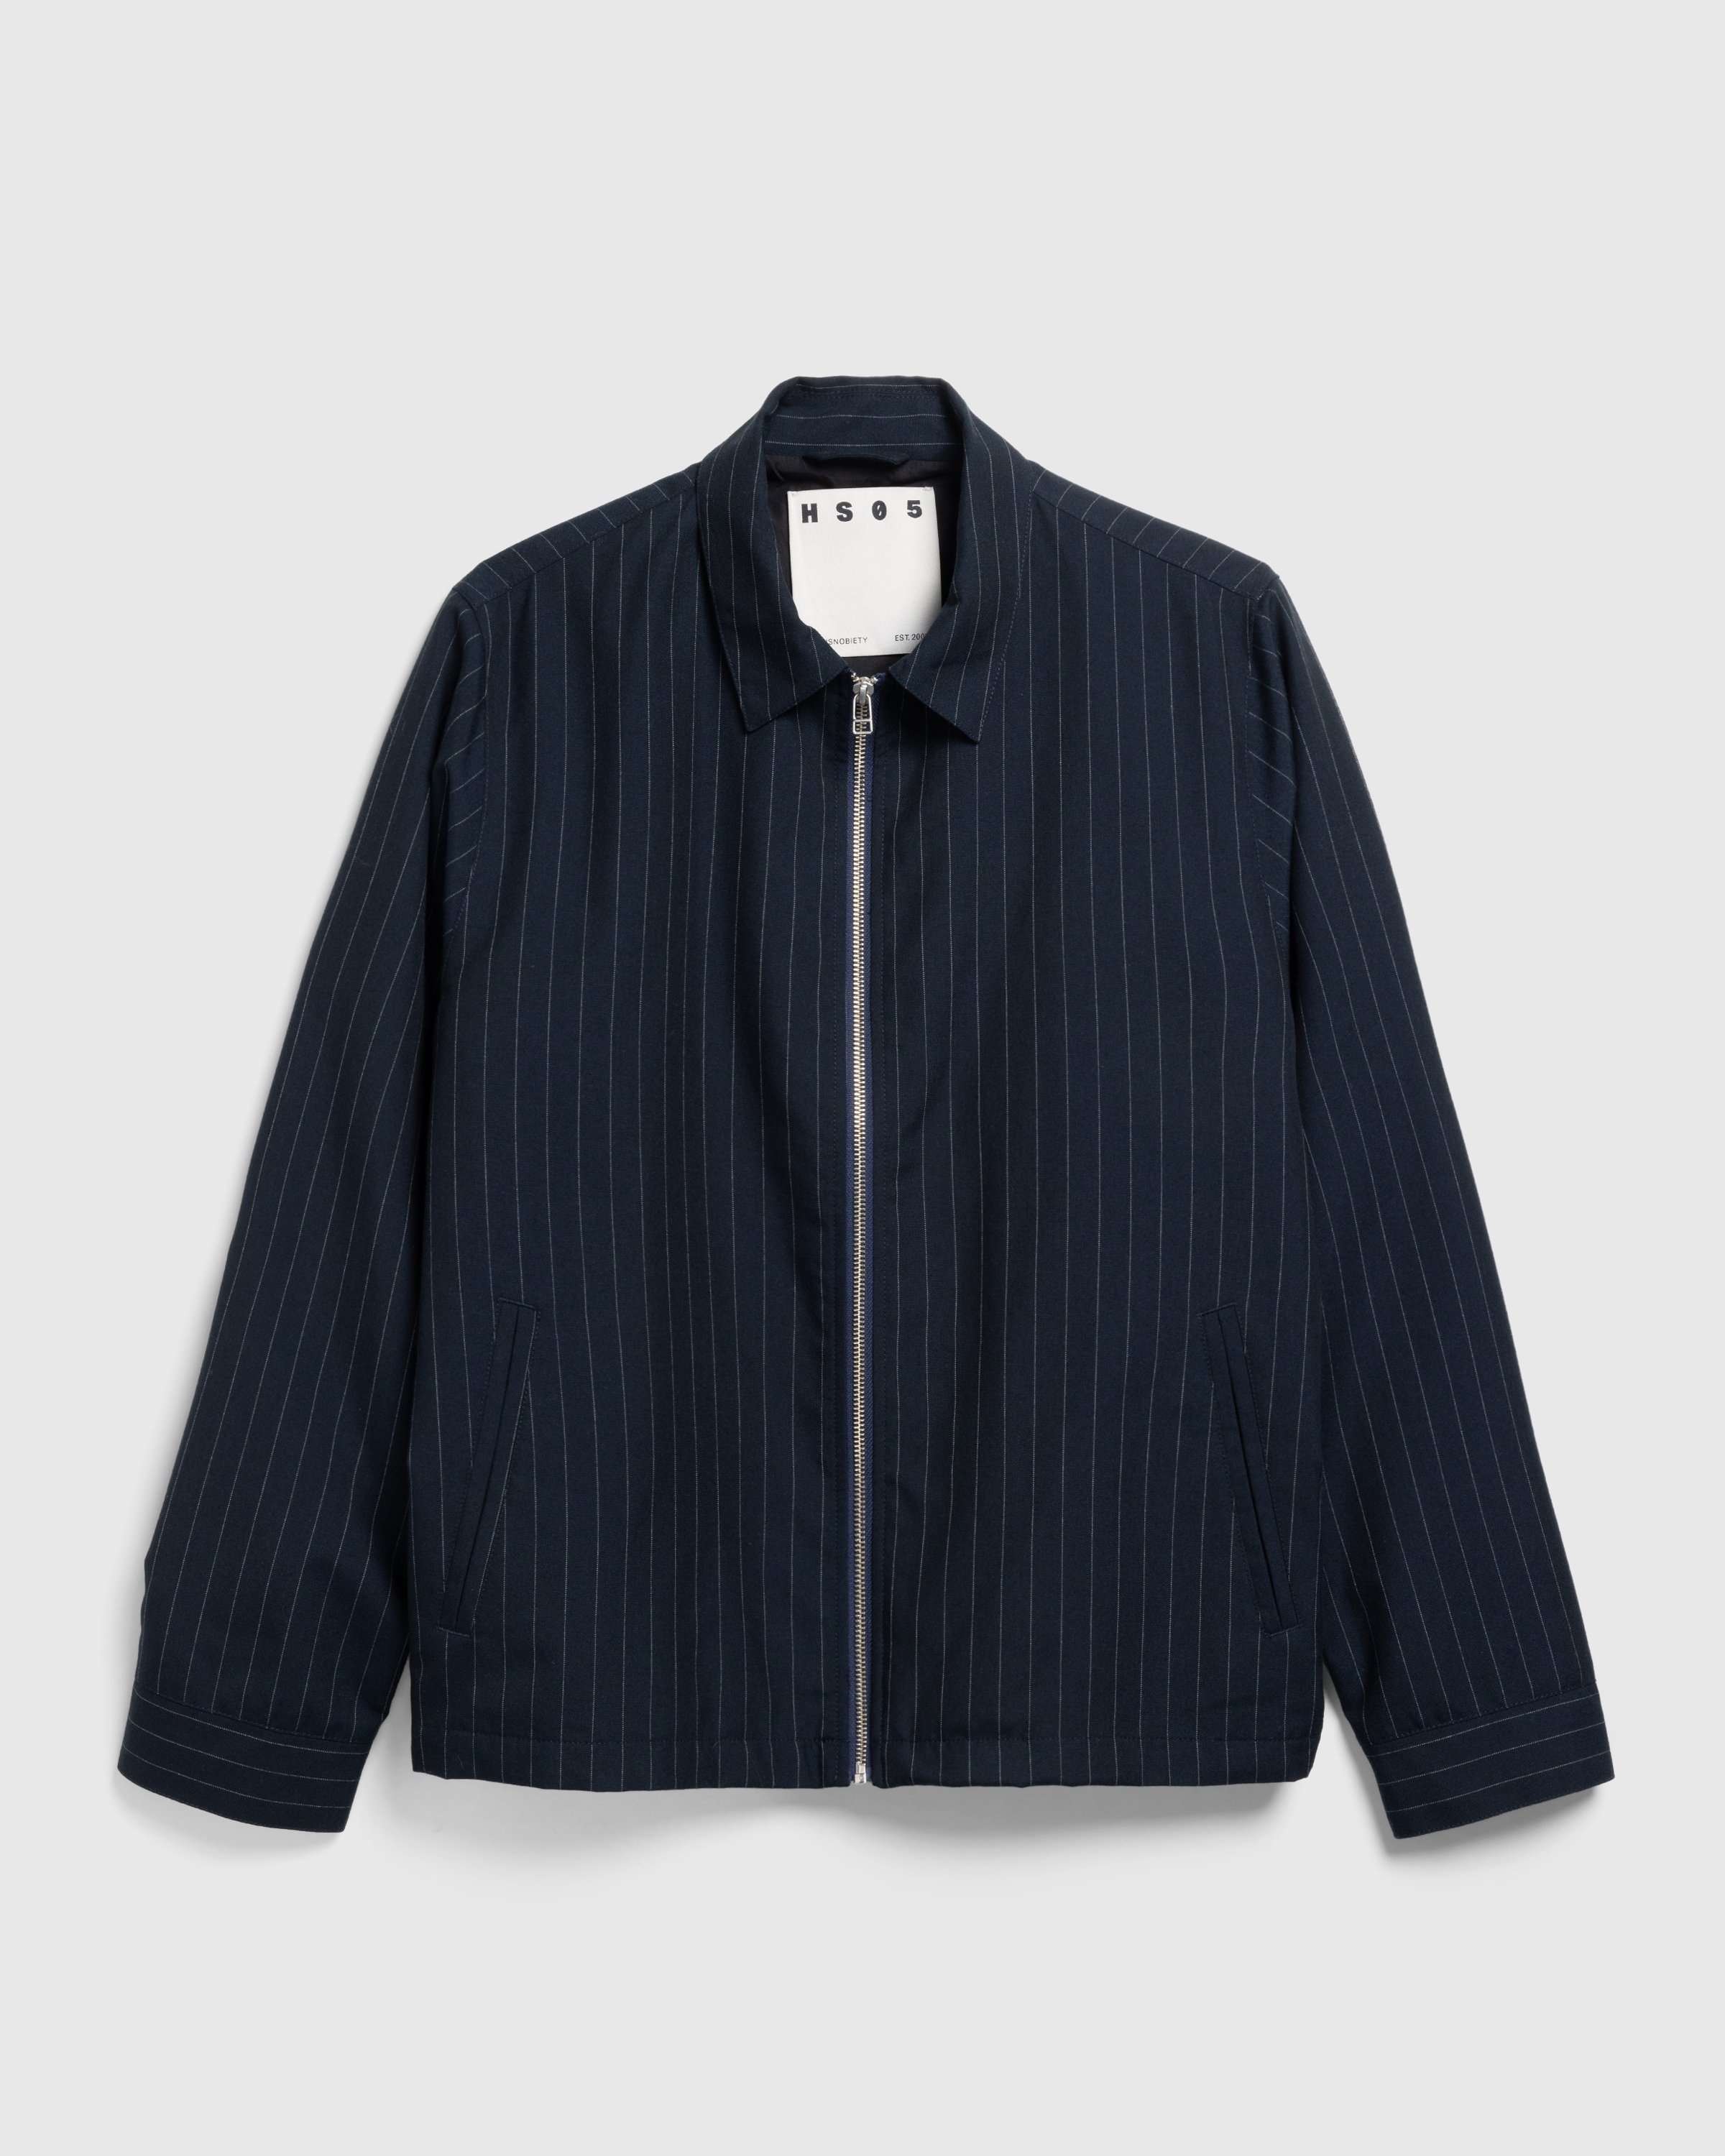 Highsnobiety HS05 - Tropical Suiting Jacket Stripes Navy - Clothing - Stripes Navy - Image 1